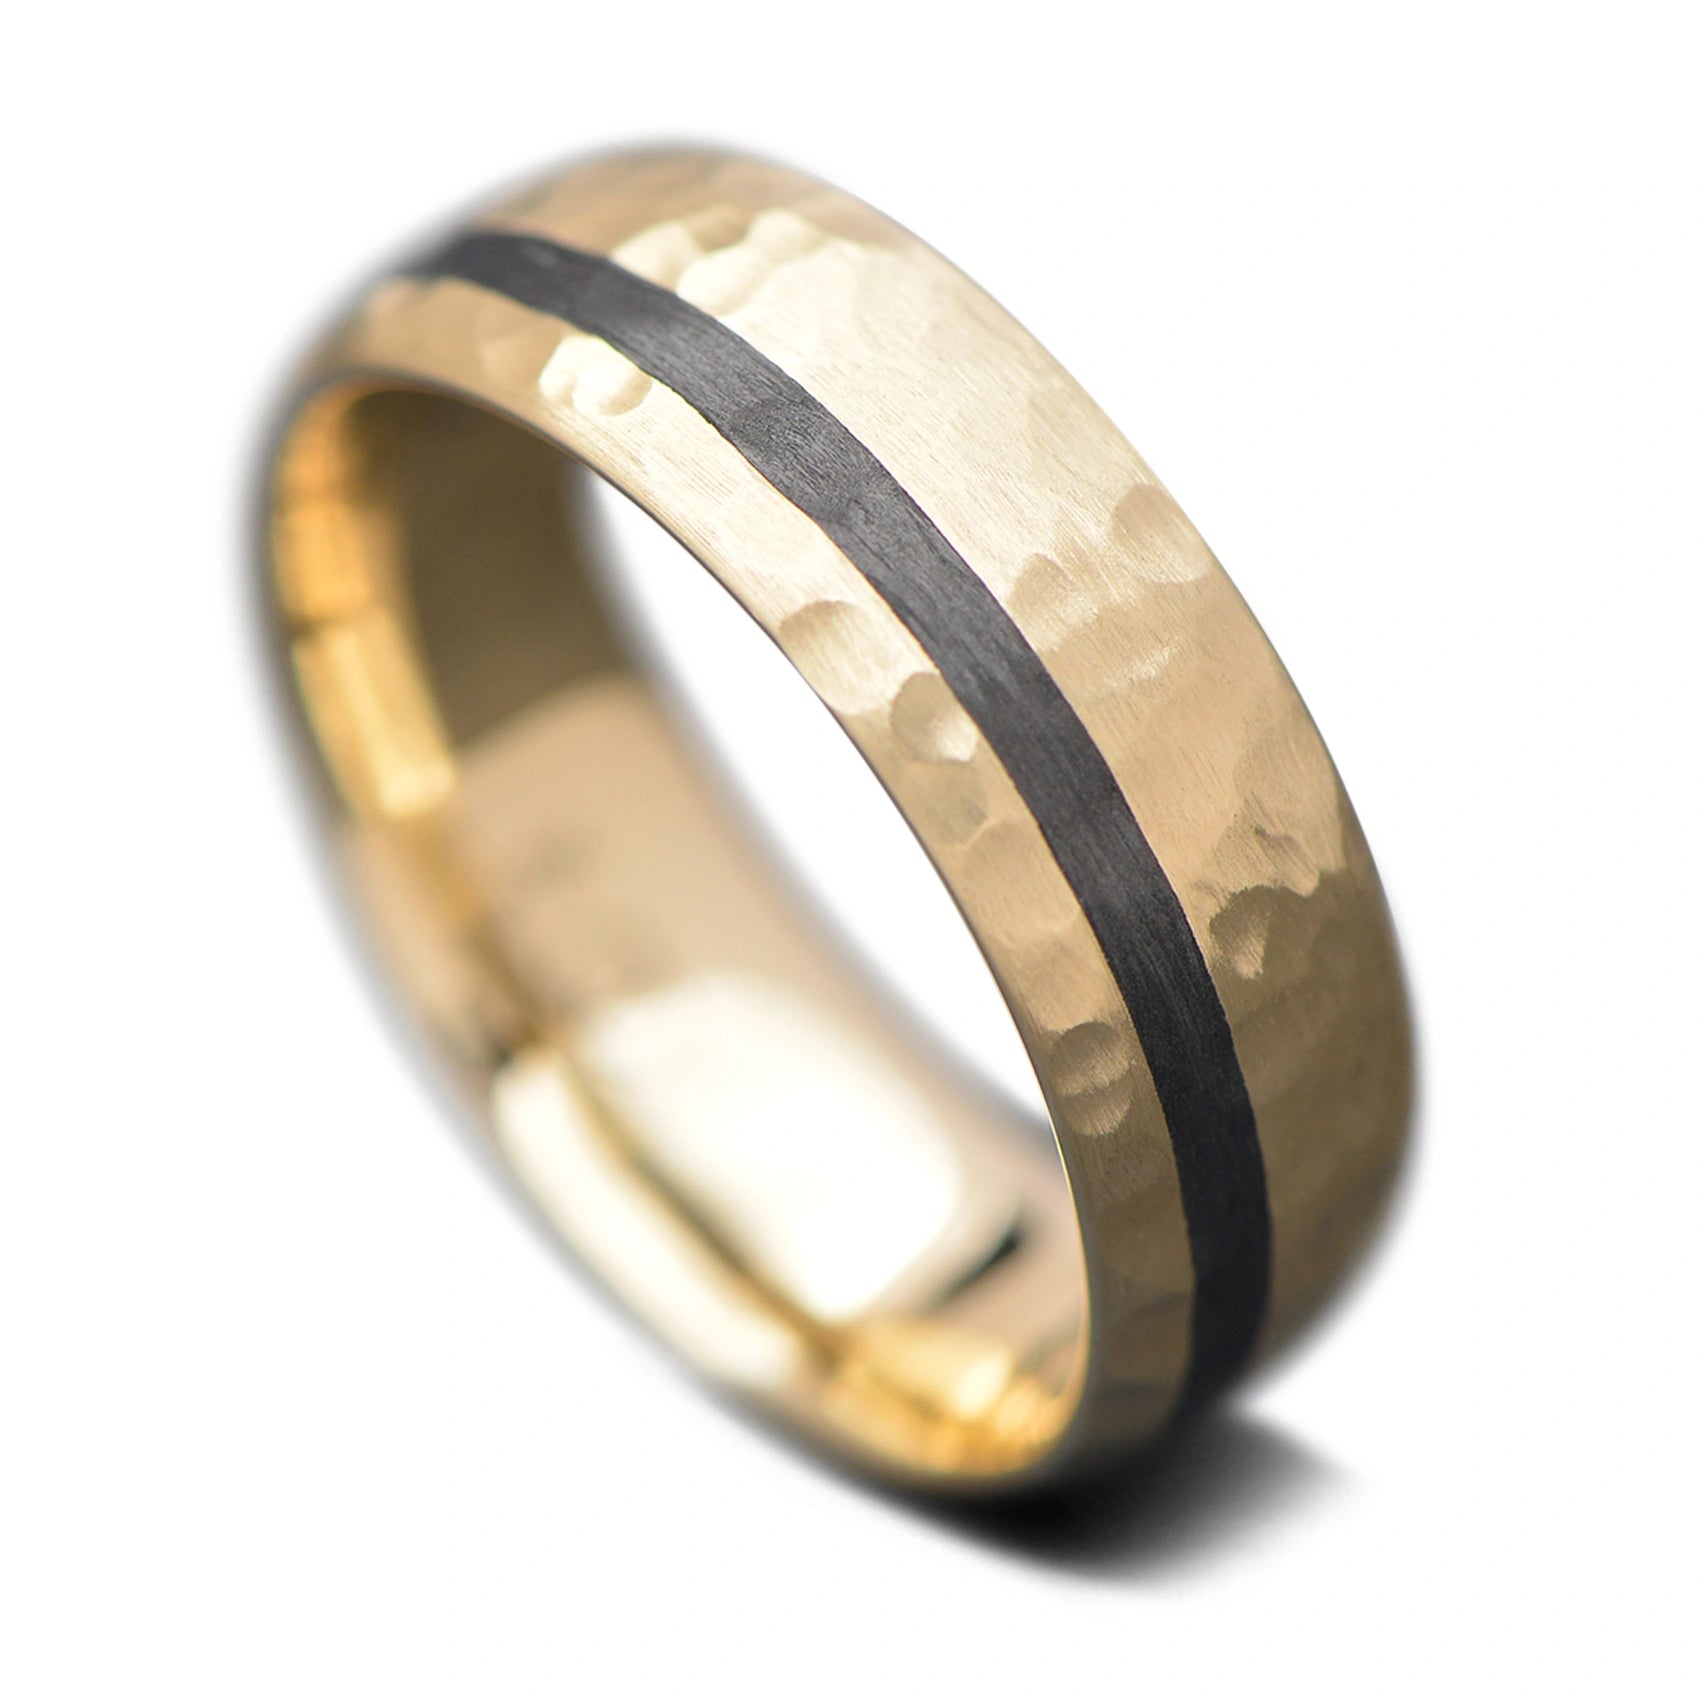 Yellow Gold core wedding ring with Unidirectional inlay, 7mm -THE COMMITMENT